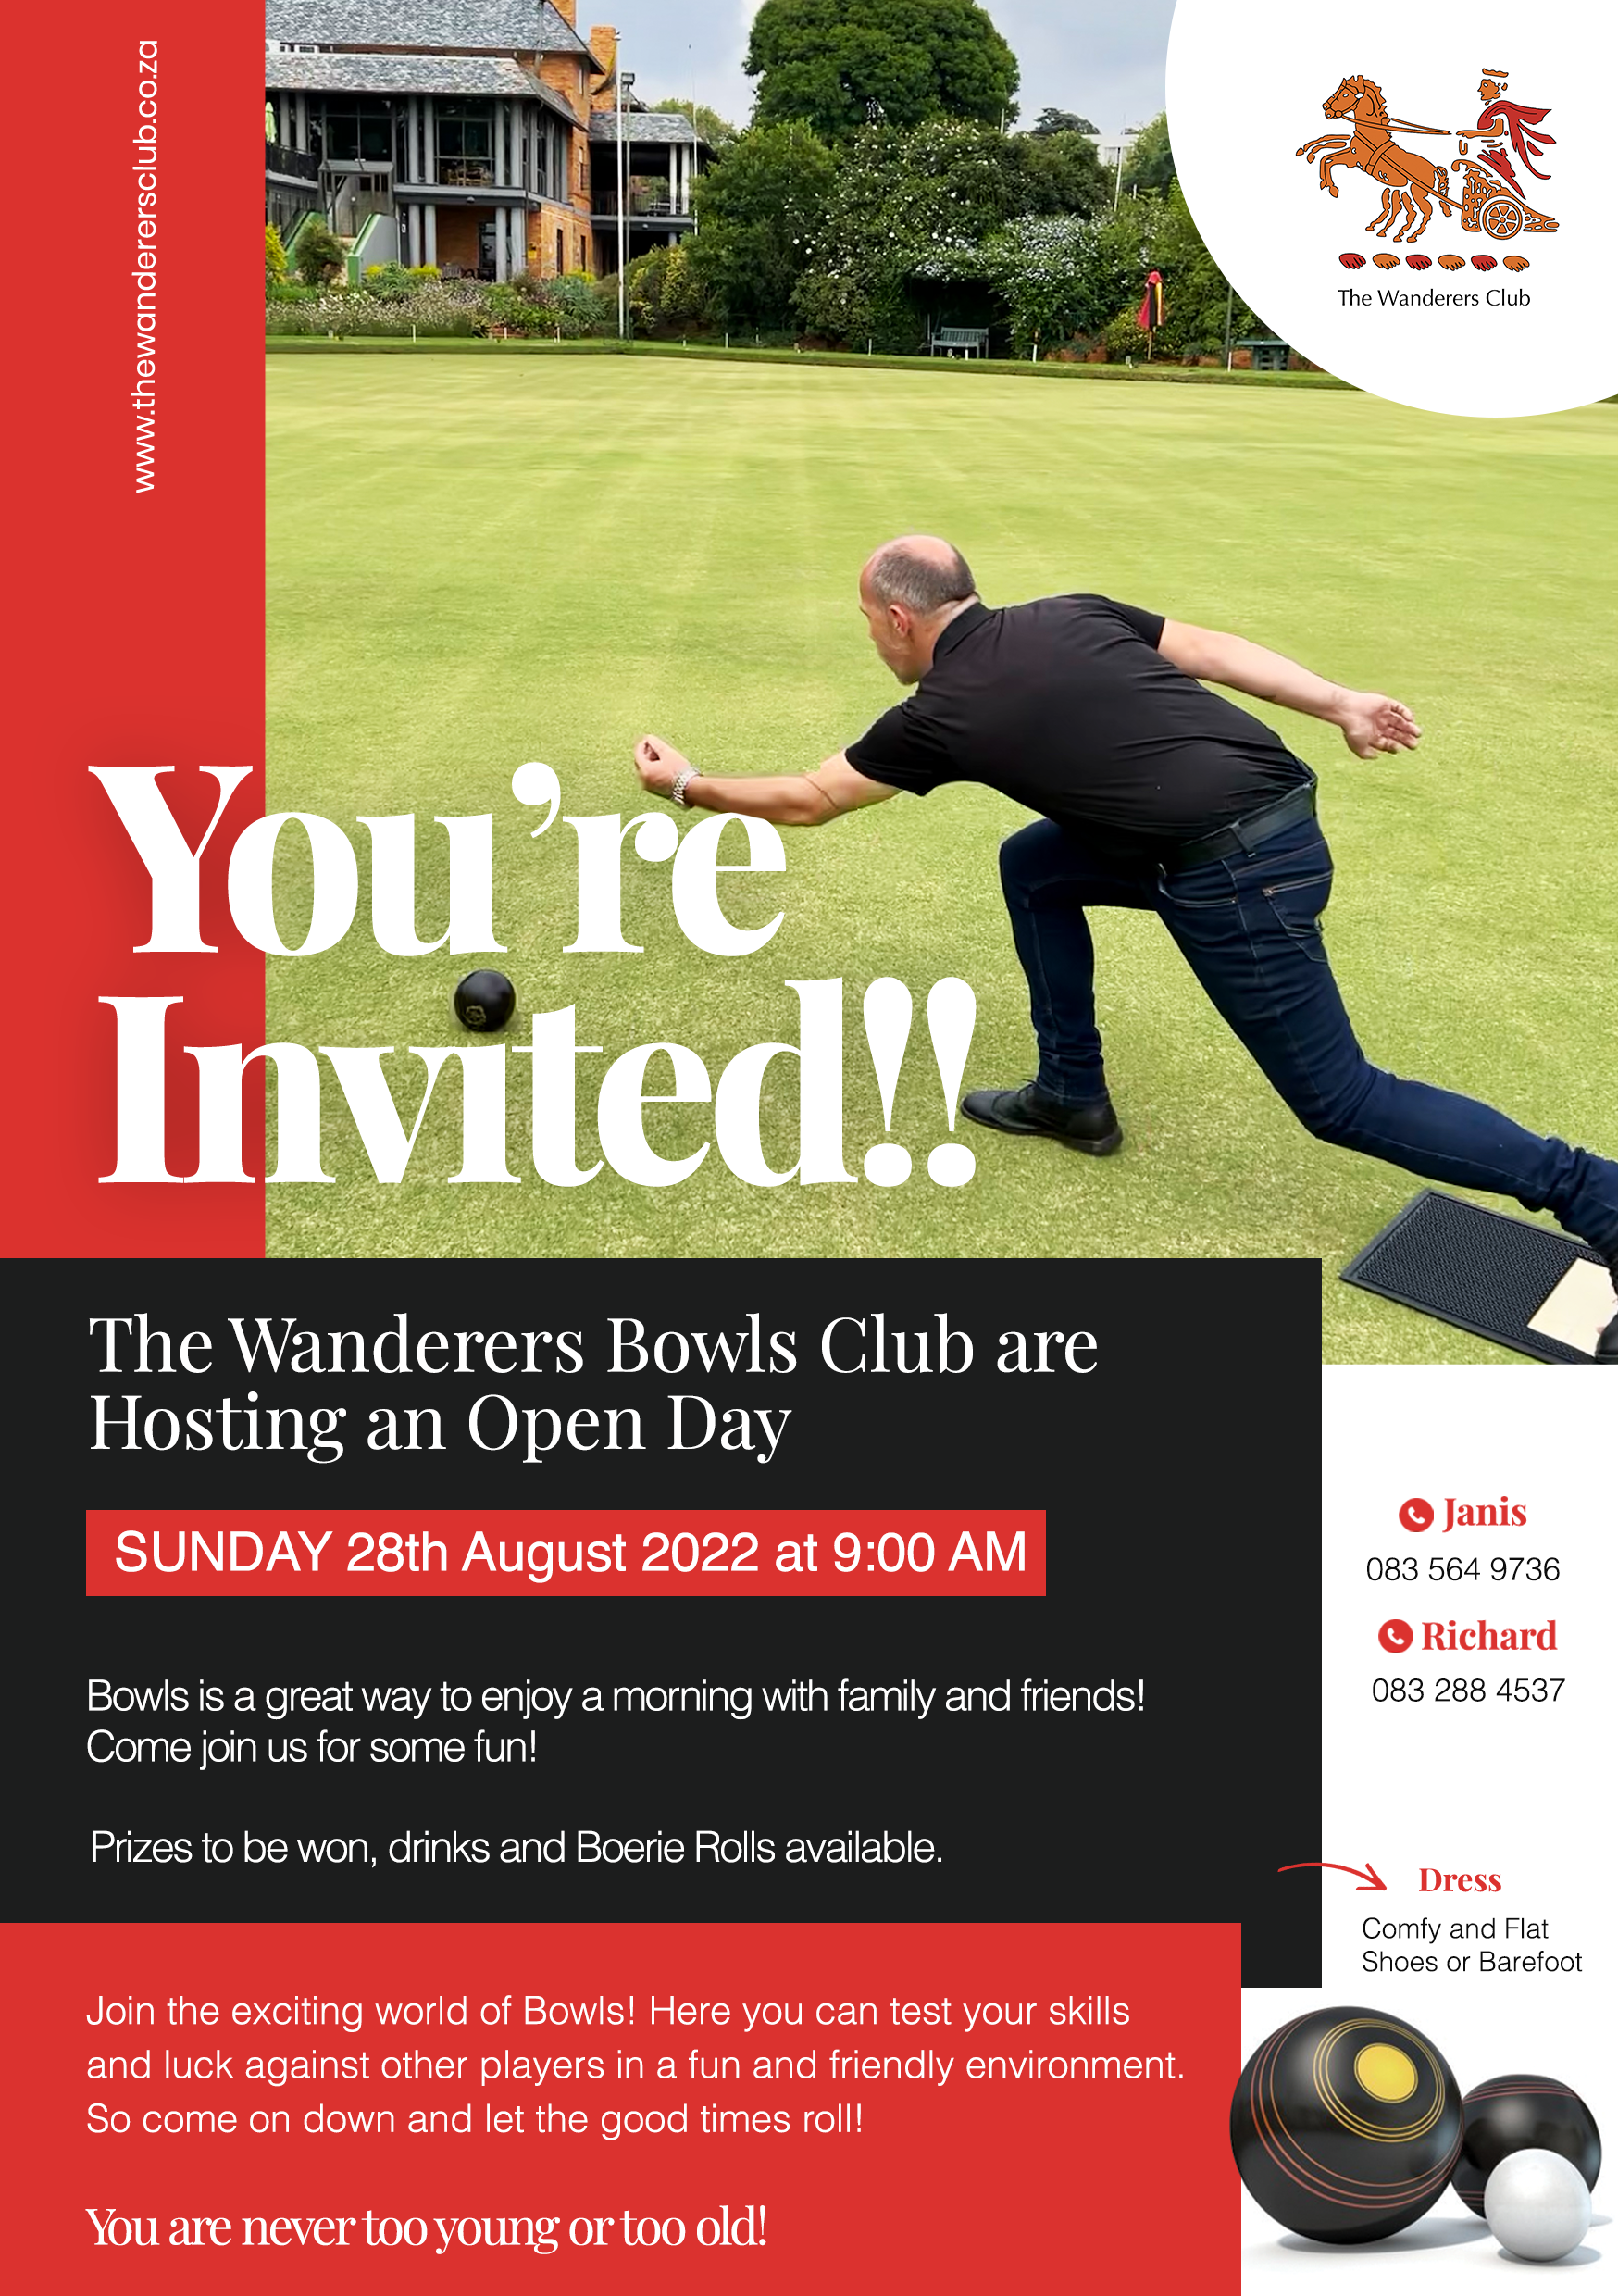 wanderers club Bowls Open Day 4